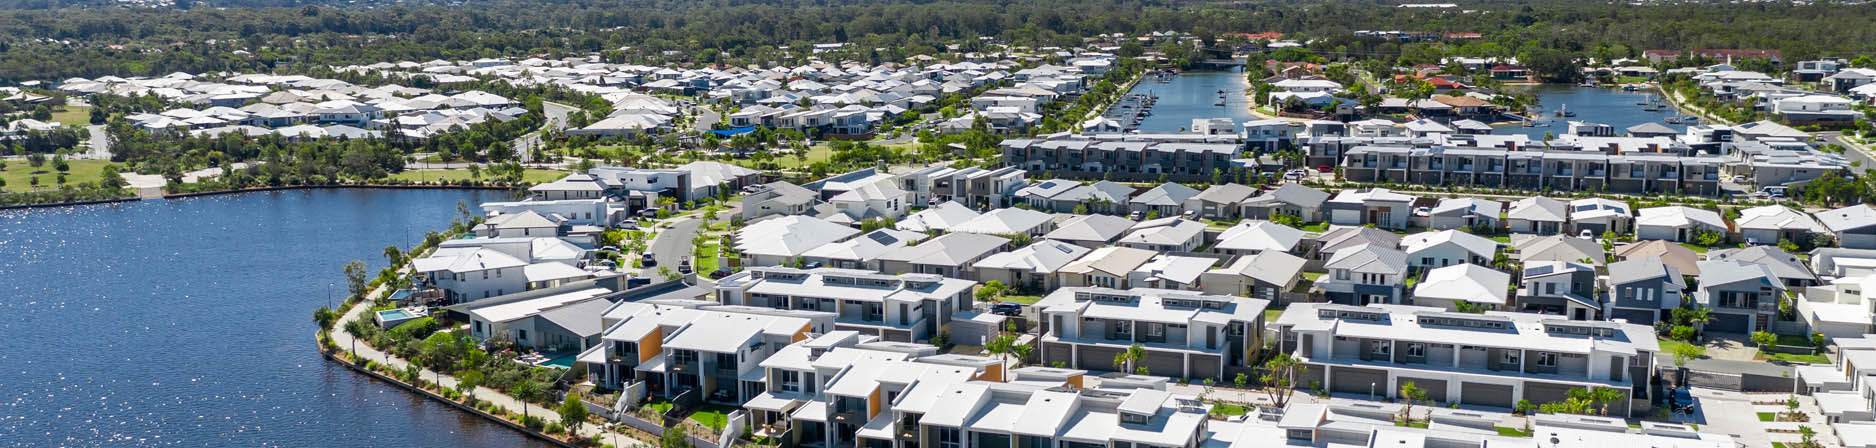 Aquiv townhouses Brightwater